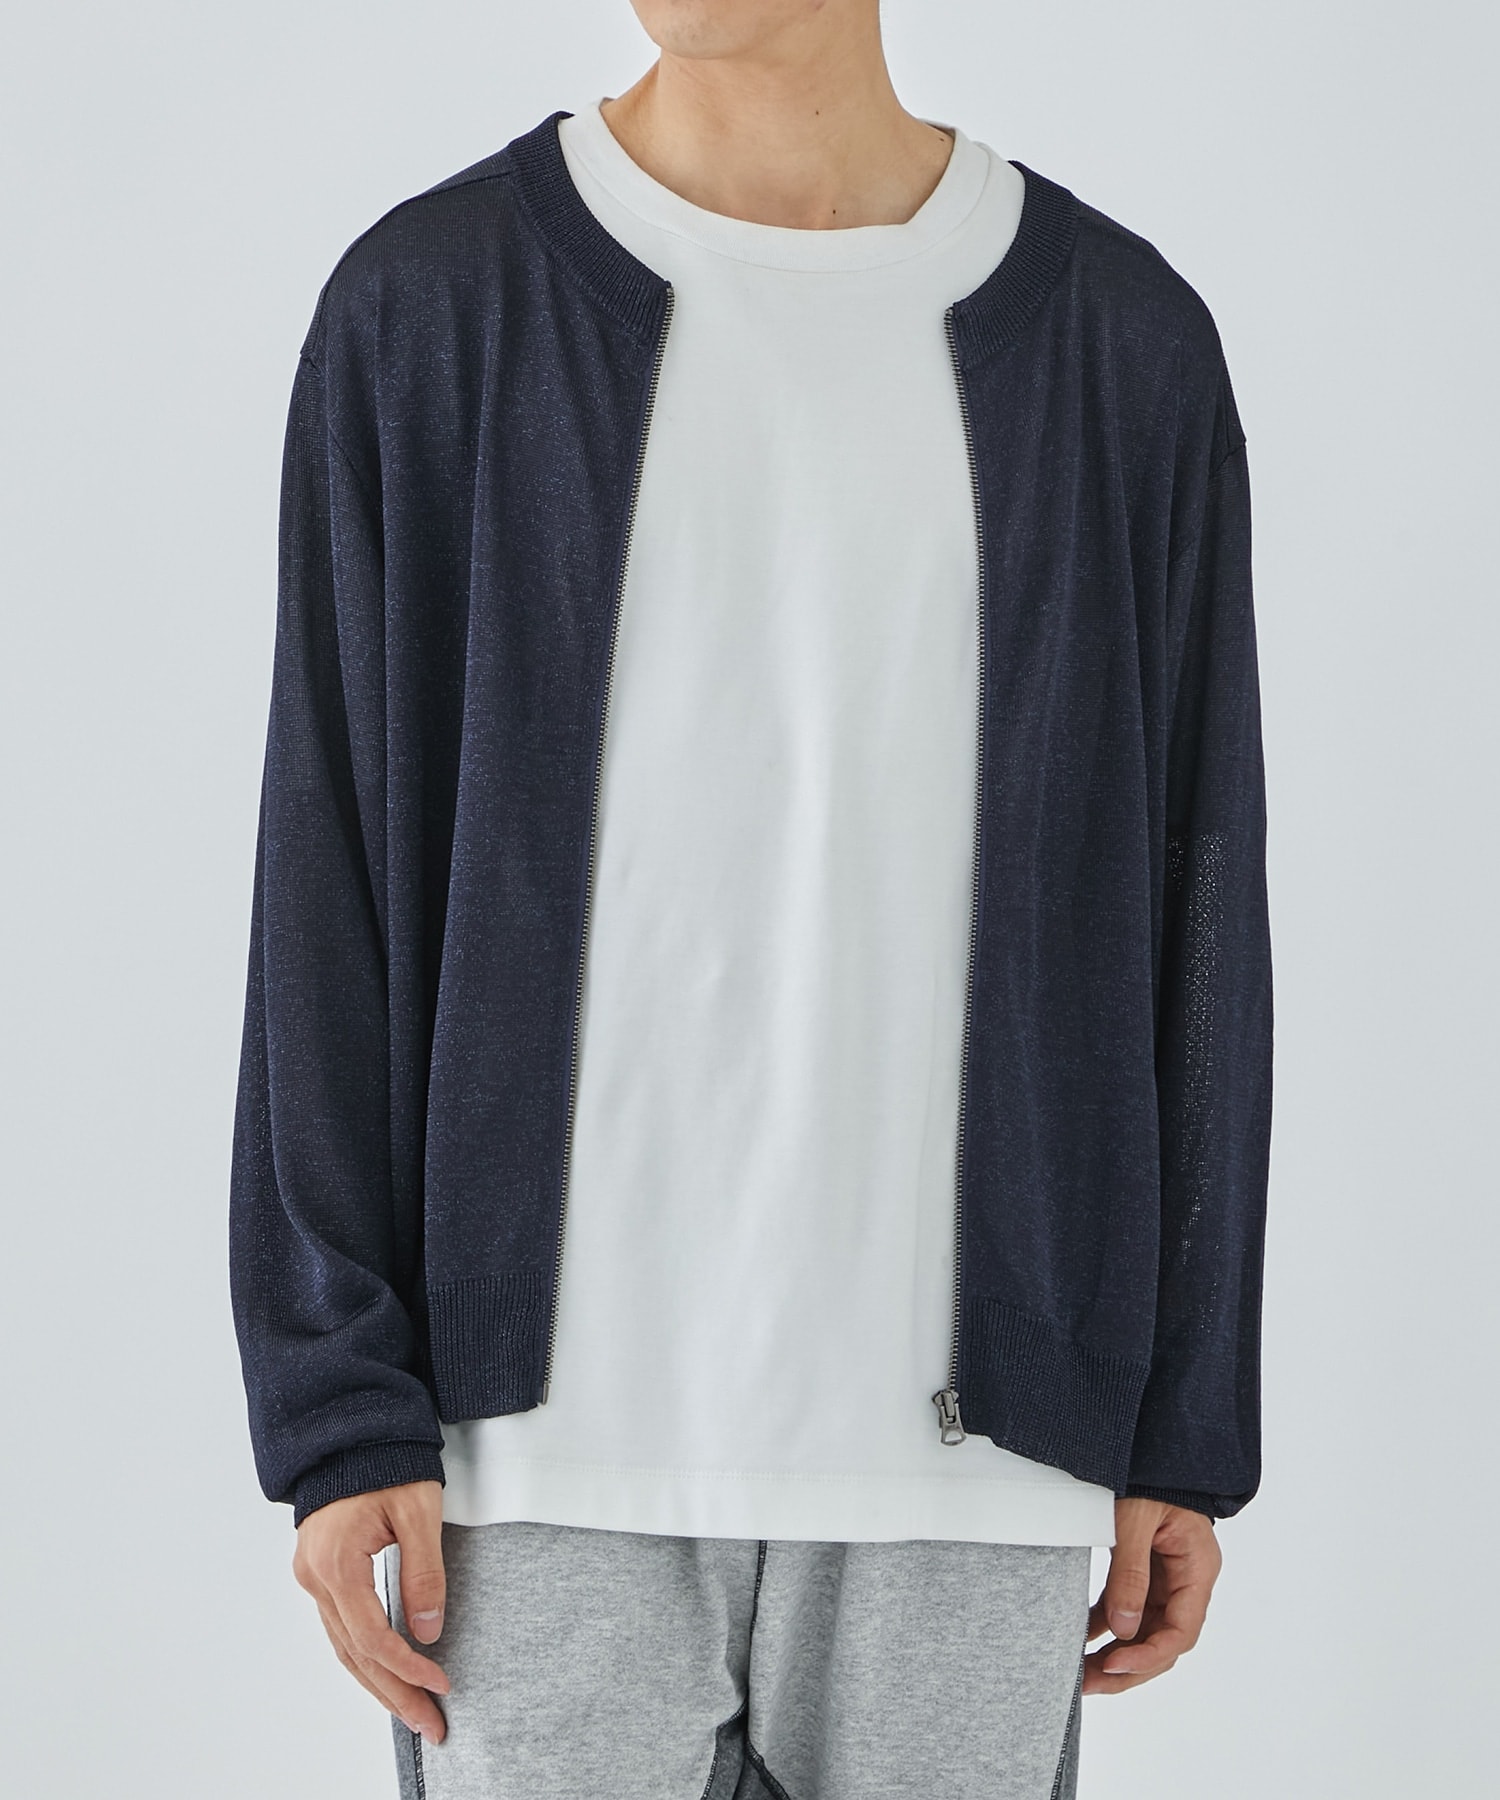 LAME ZIP UP KNIT